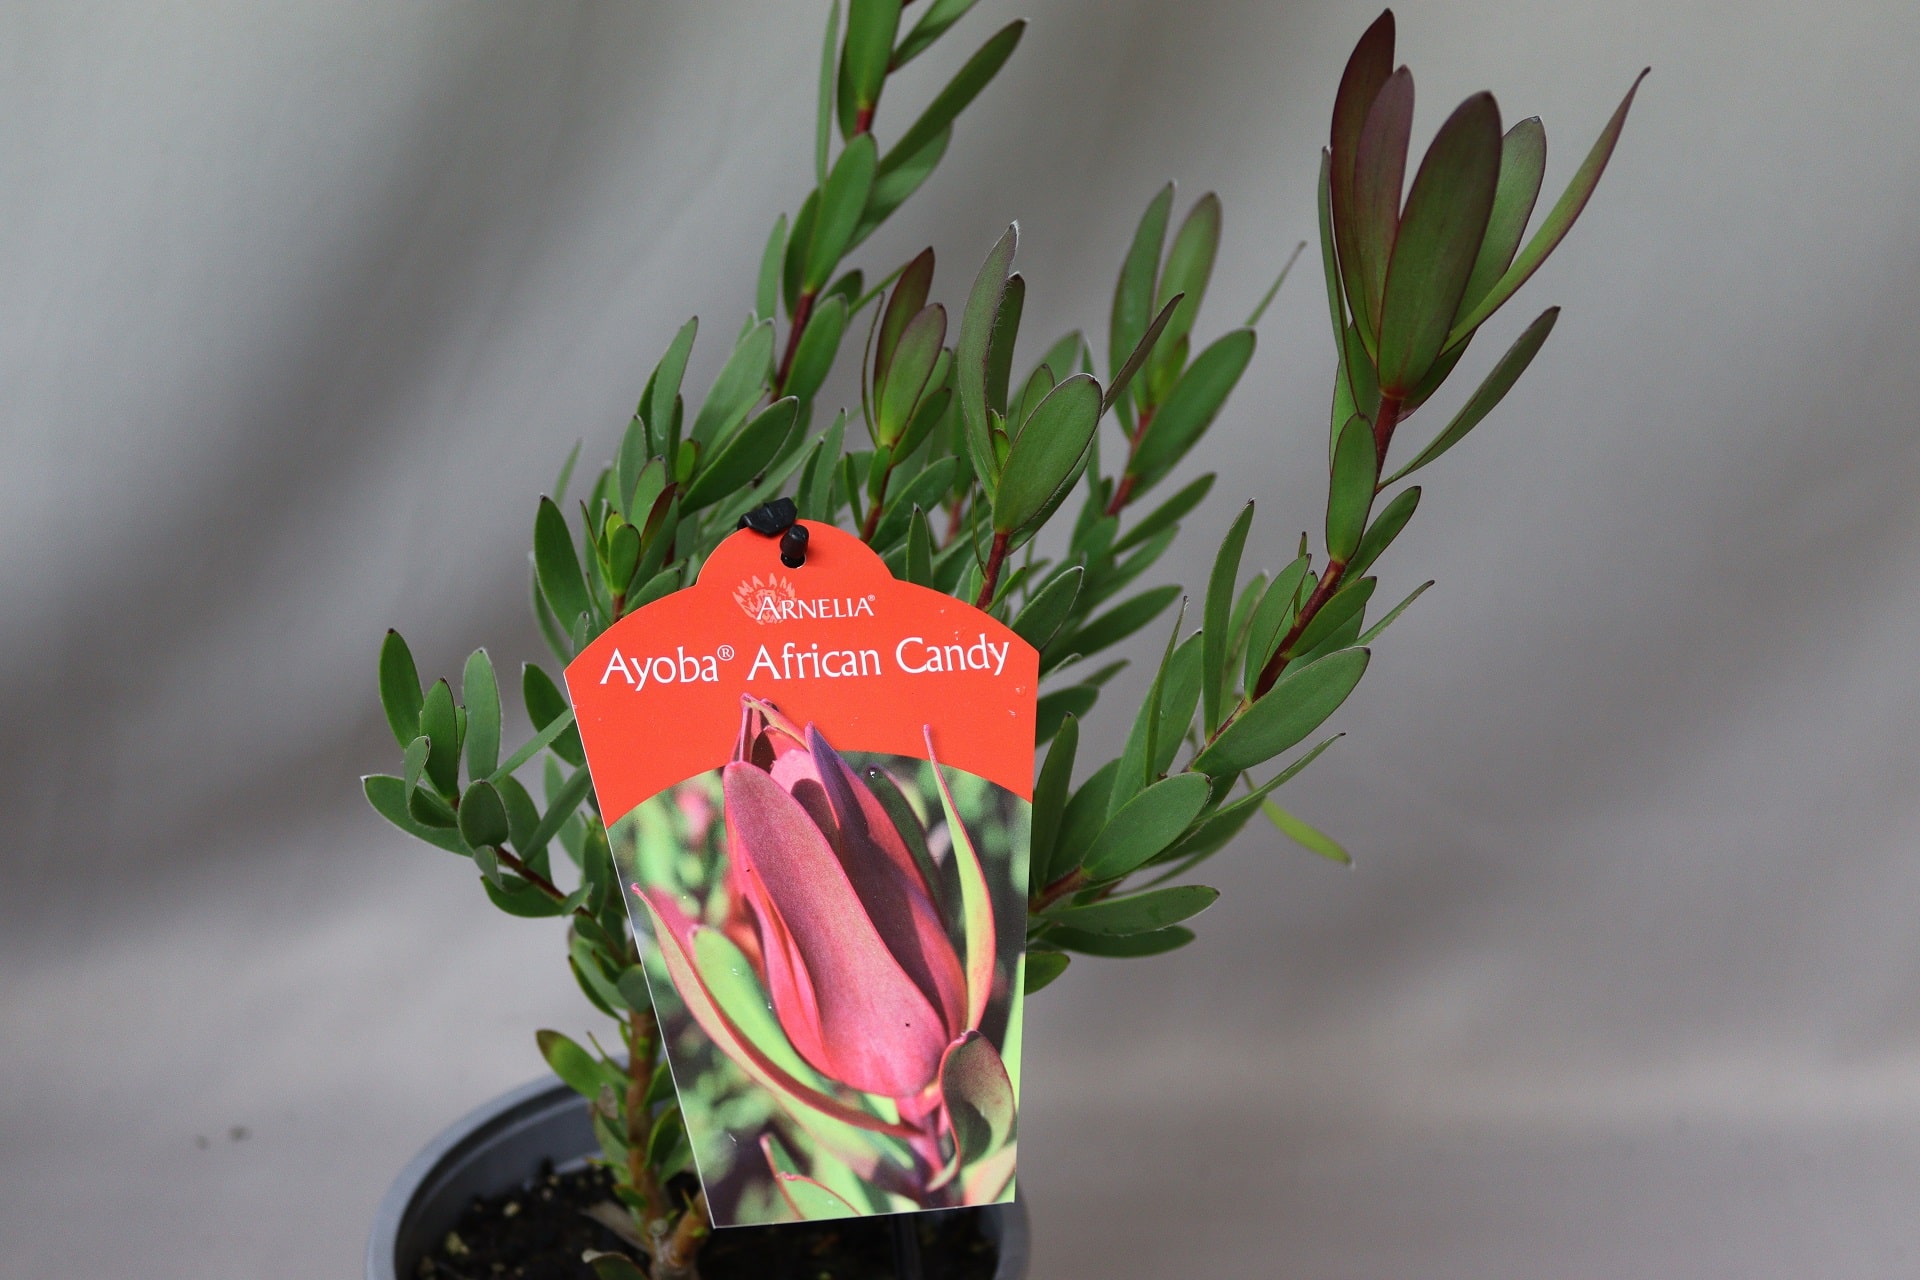 Close-up of the Leucadendron Ayoba African Candy plant in a pot. The leaves are dark green and stems reddish.